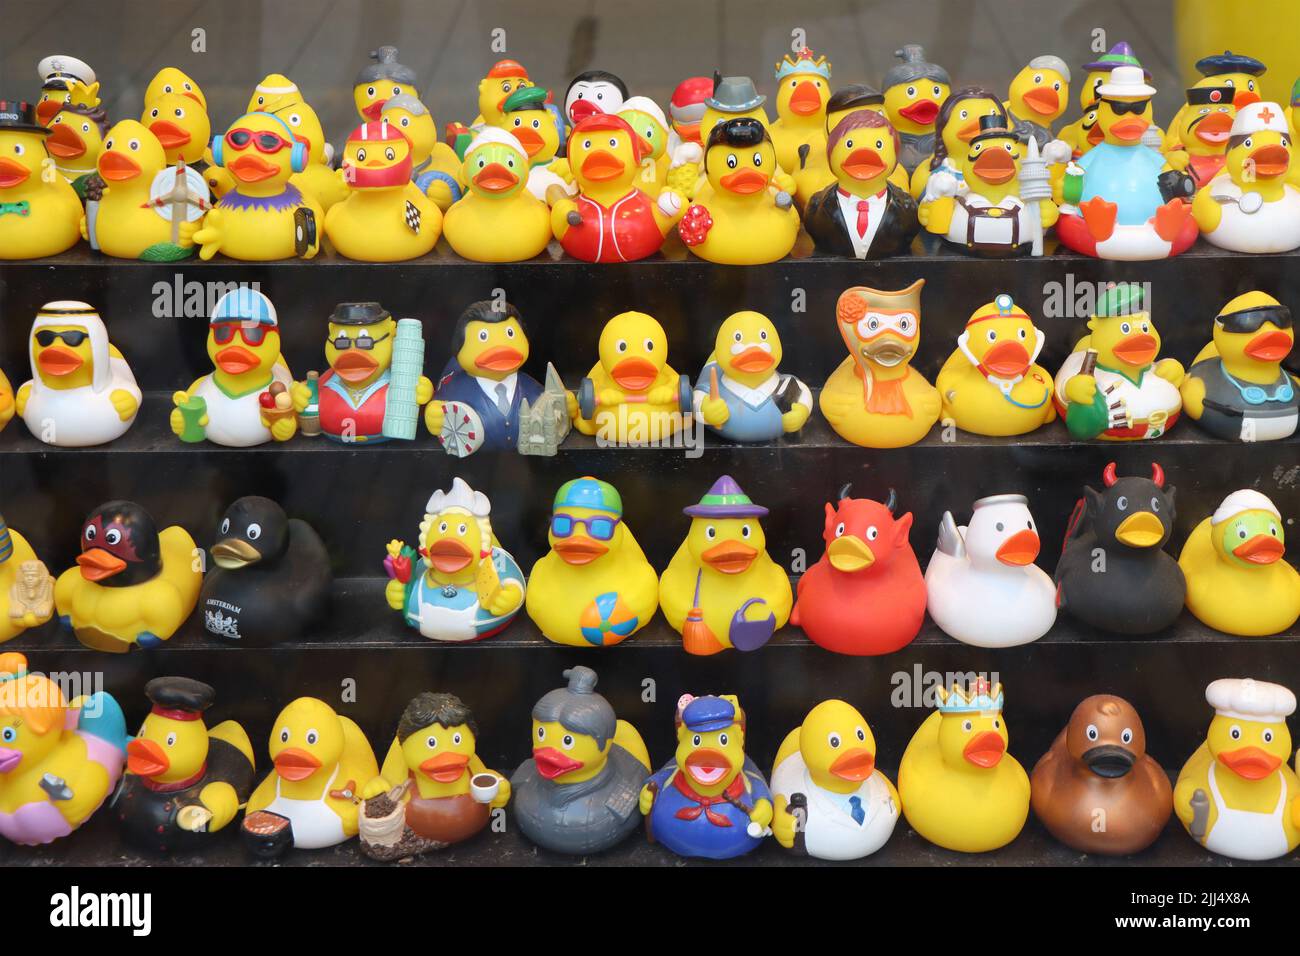 Amsterdam, Netherlands - June 23, 2022: Amsterdam duck store. Variety of funny rubber ducks such as as a souvenir in Amsterdam. Stock Photo